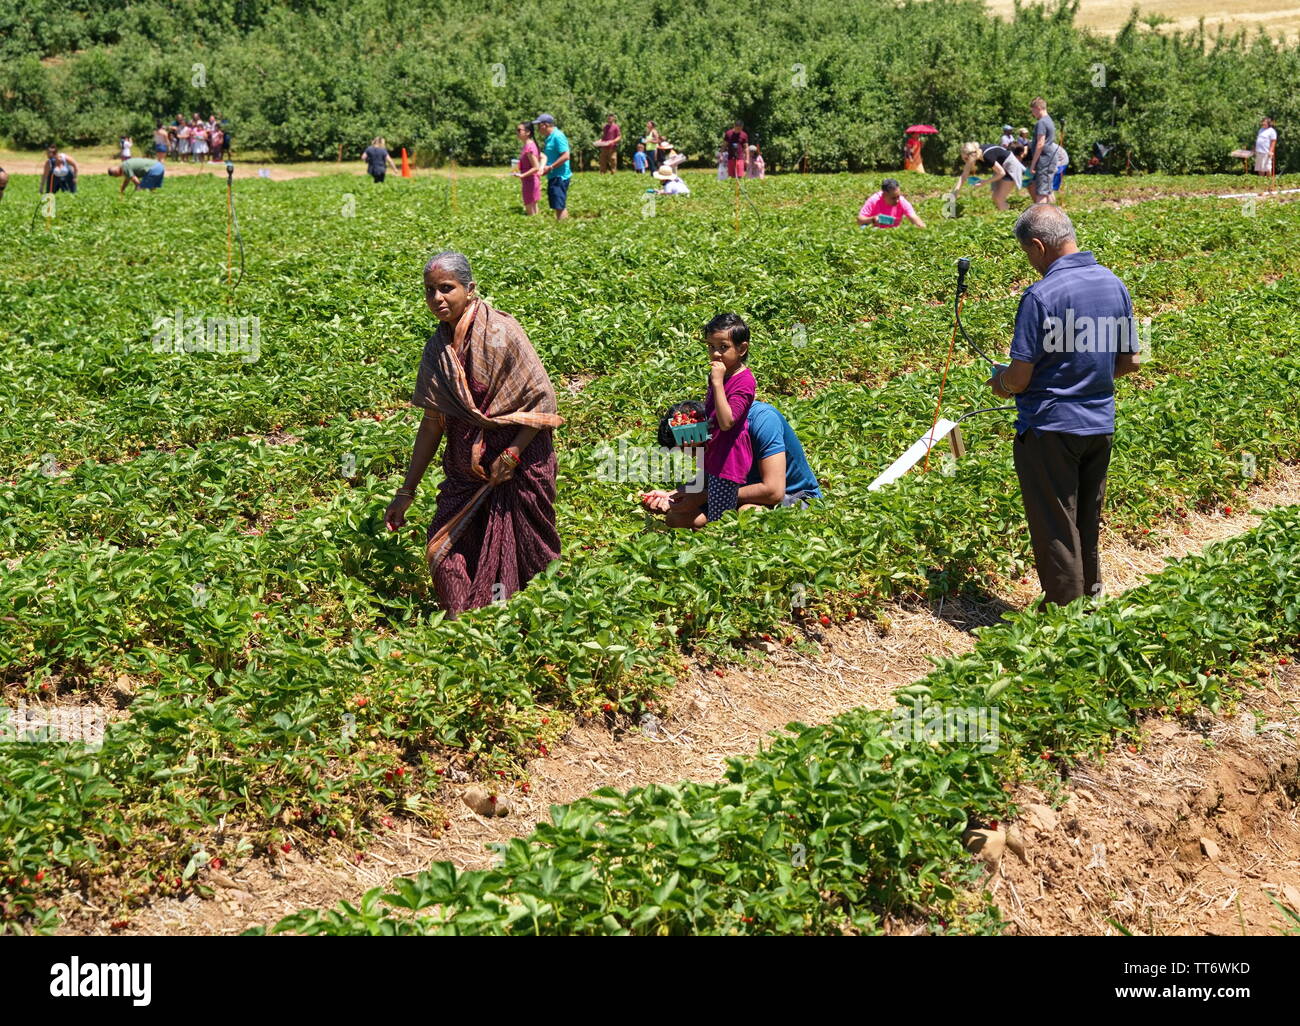 Middlefield, CT USA. Jun 2019. Indian American family enjoying the first days of a New England fruit picking season for delicious strawberries. Stock Photo